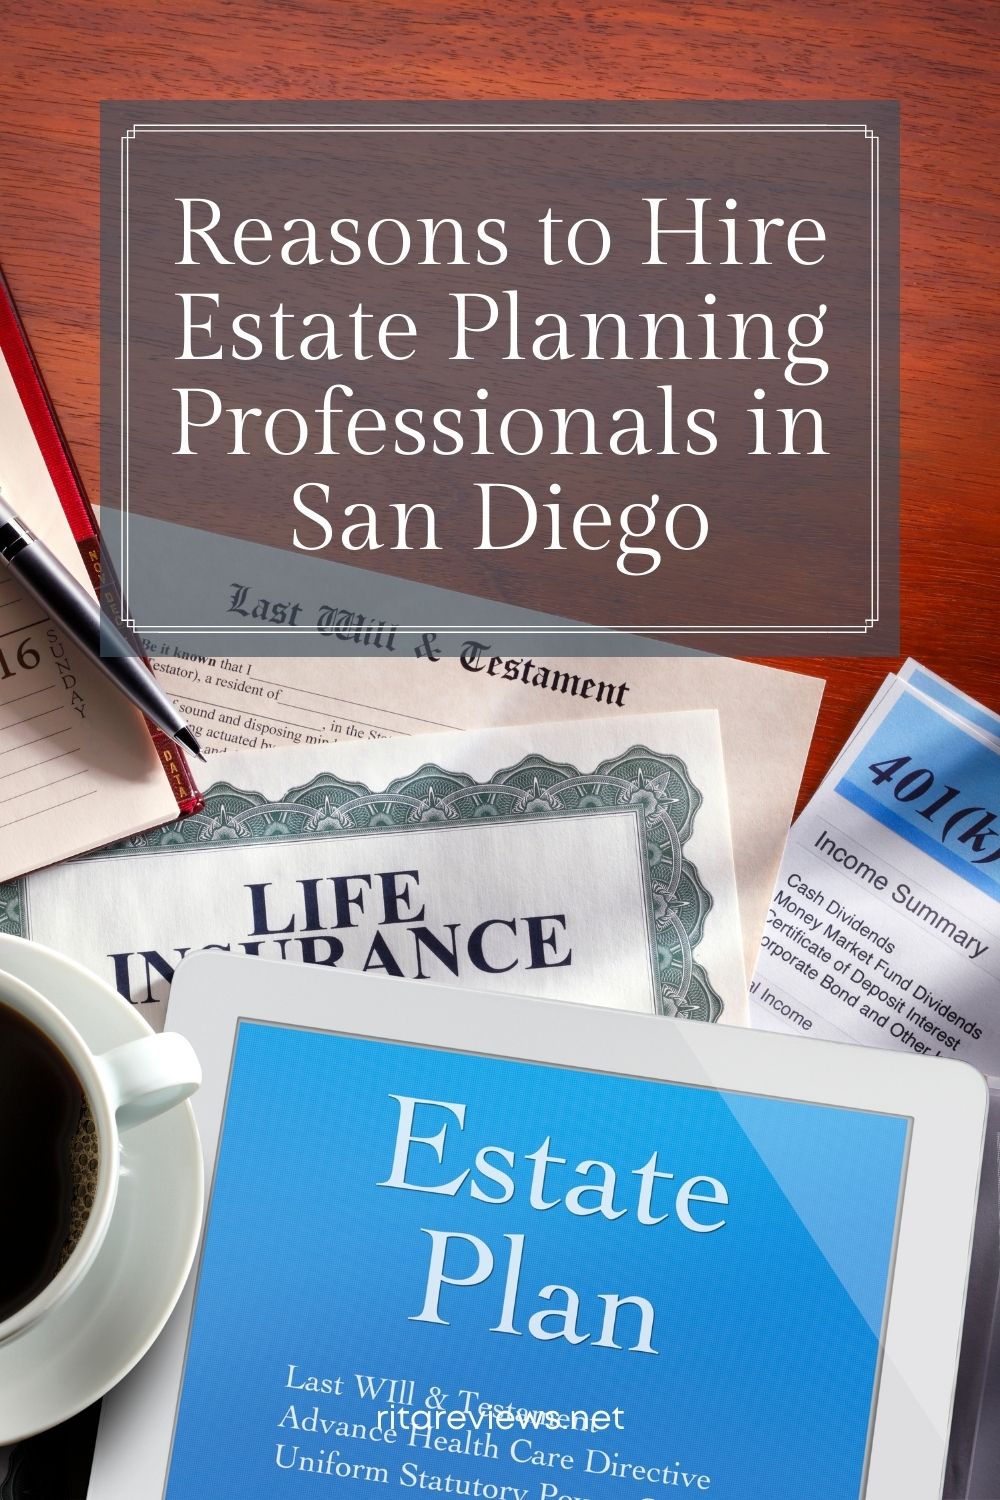 Reasons to Hire Estate Planning Professionals in San Diego